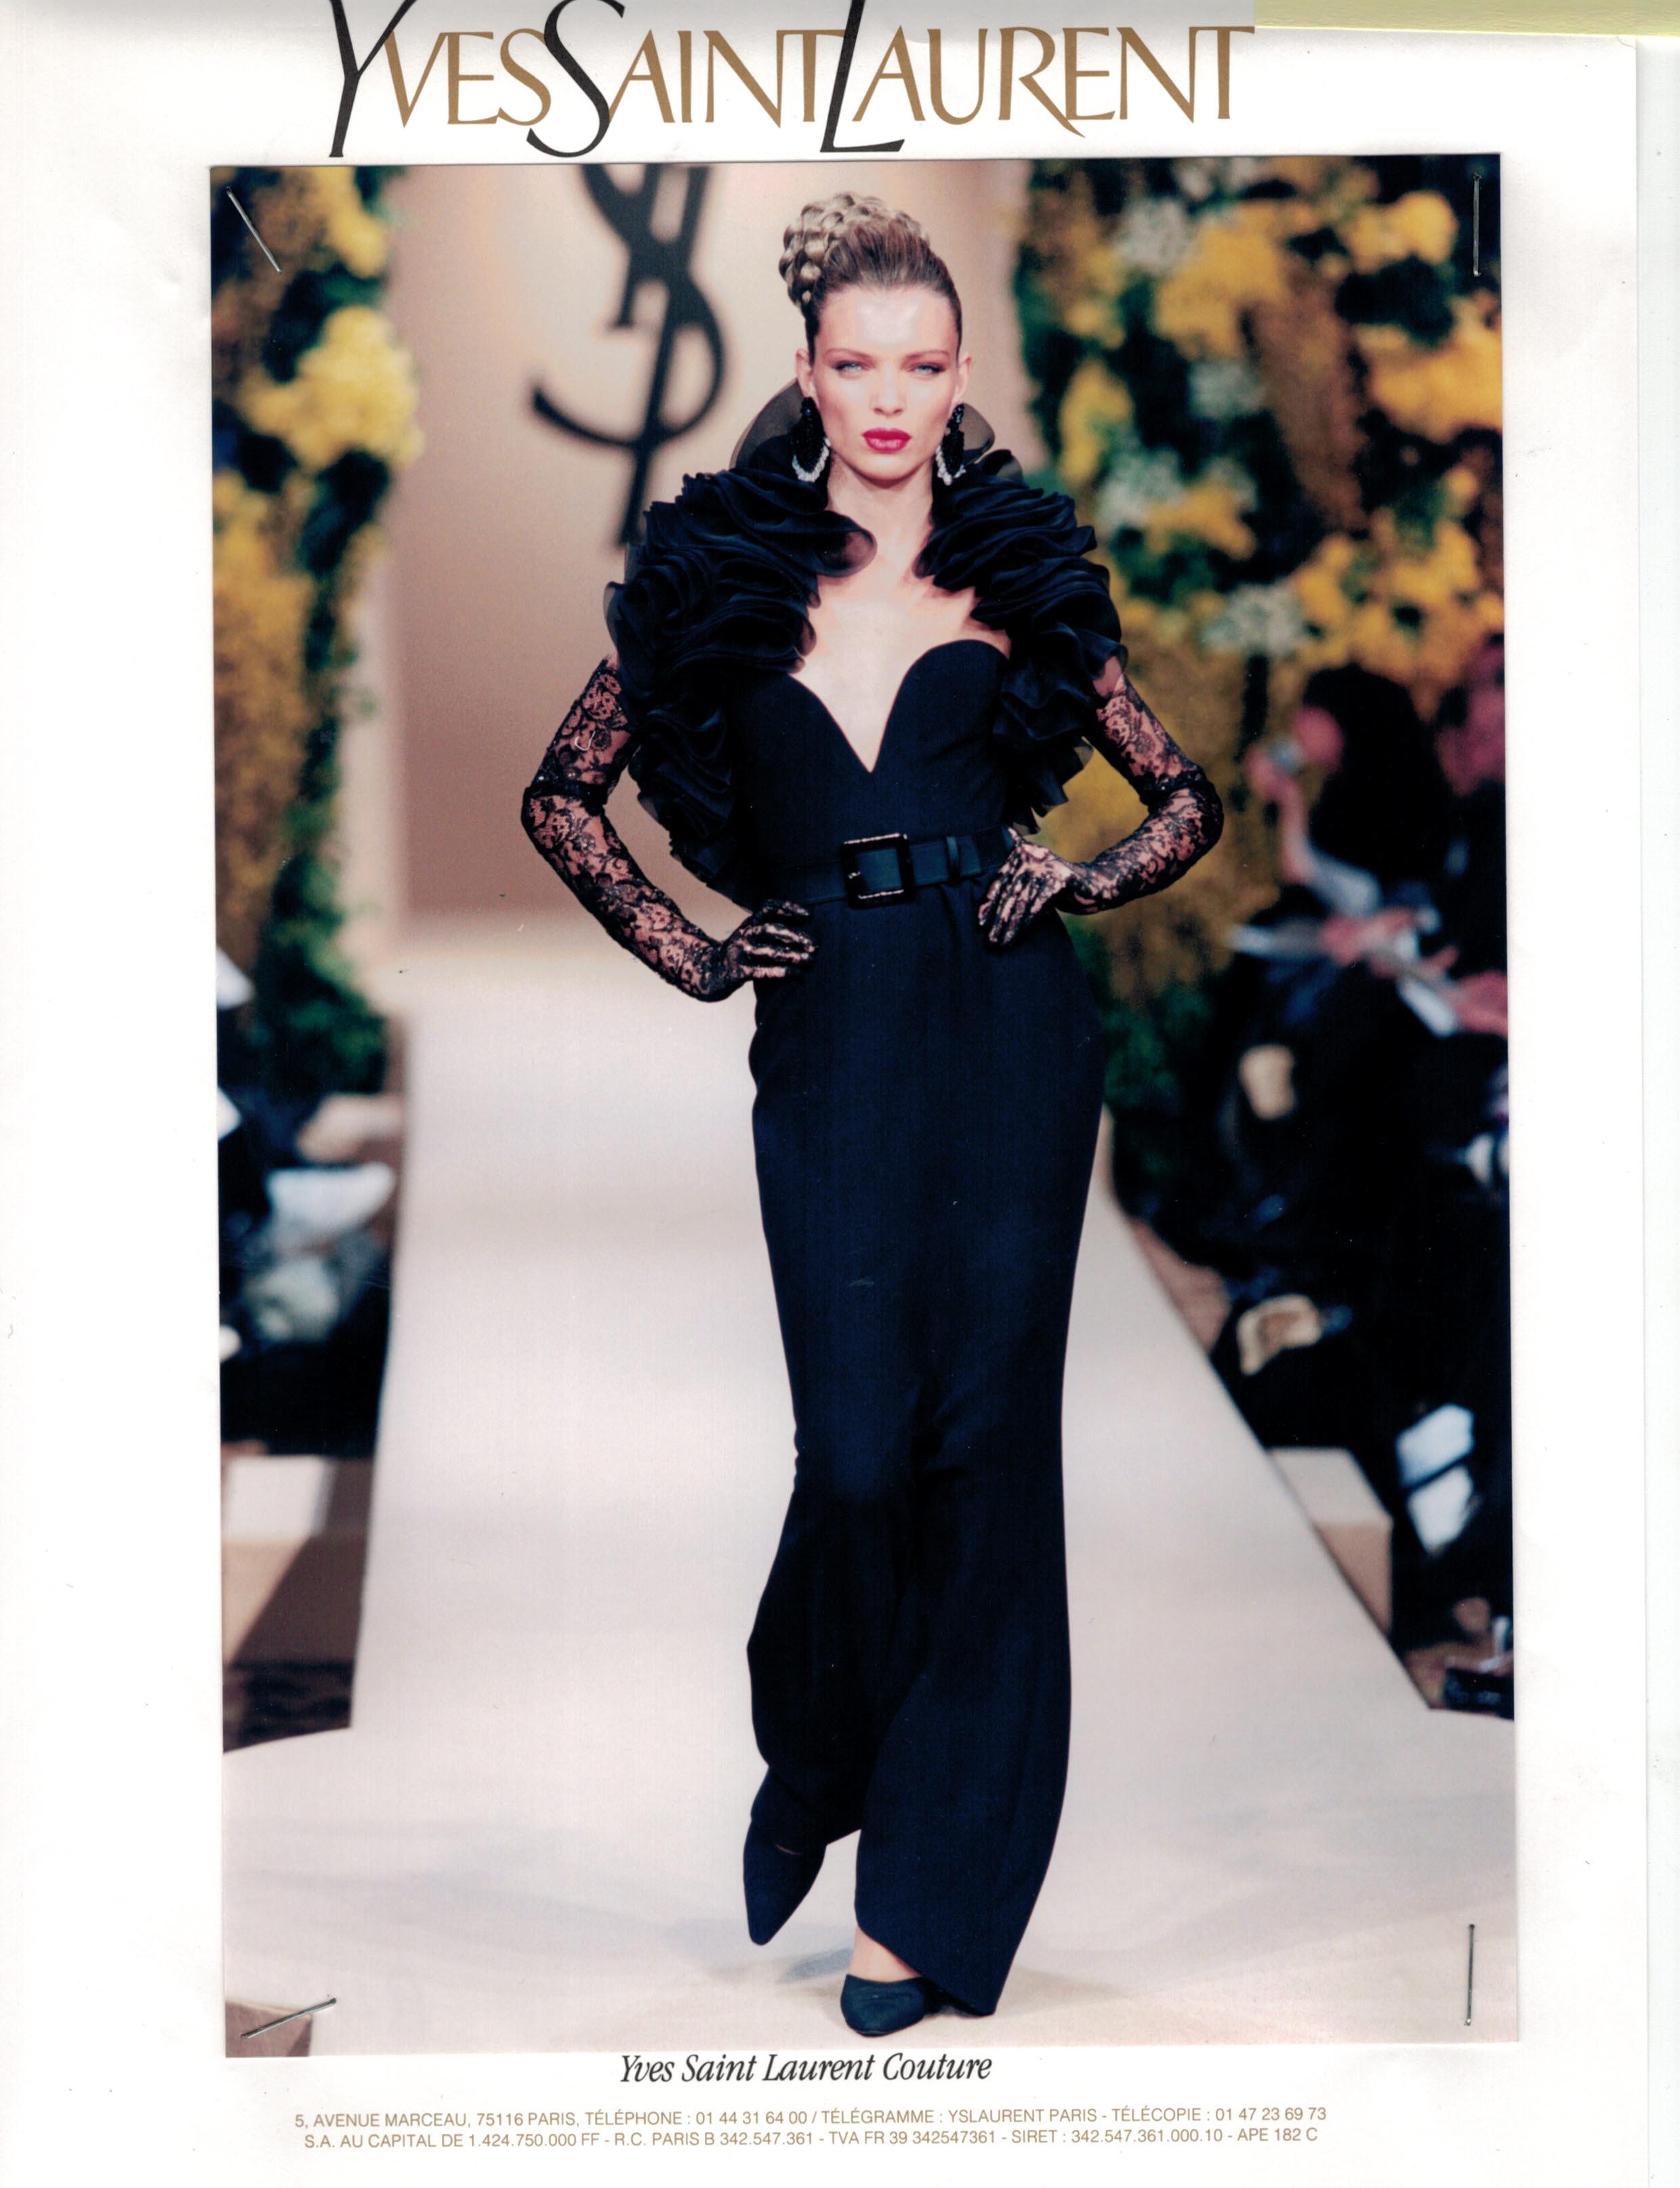 Yves Saint Laurent Haute Couture Vintage 1990’s Black Ruffle Evening Gown.  Strapless black crepe fitted gown with invisible side zipper, fully corseted and boned interior bodice, flared skirt Excellent condition - worn once.  Fully lined in silk